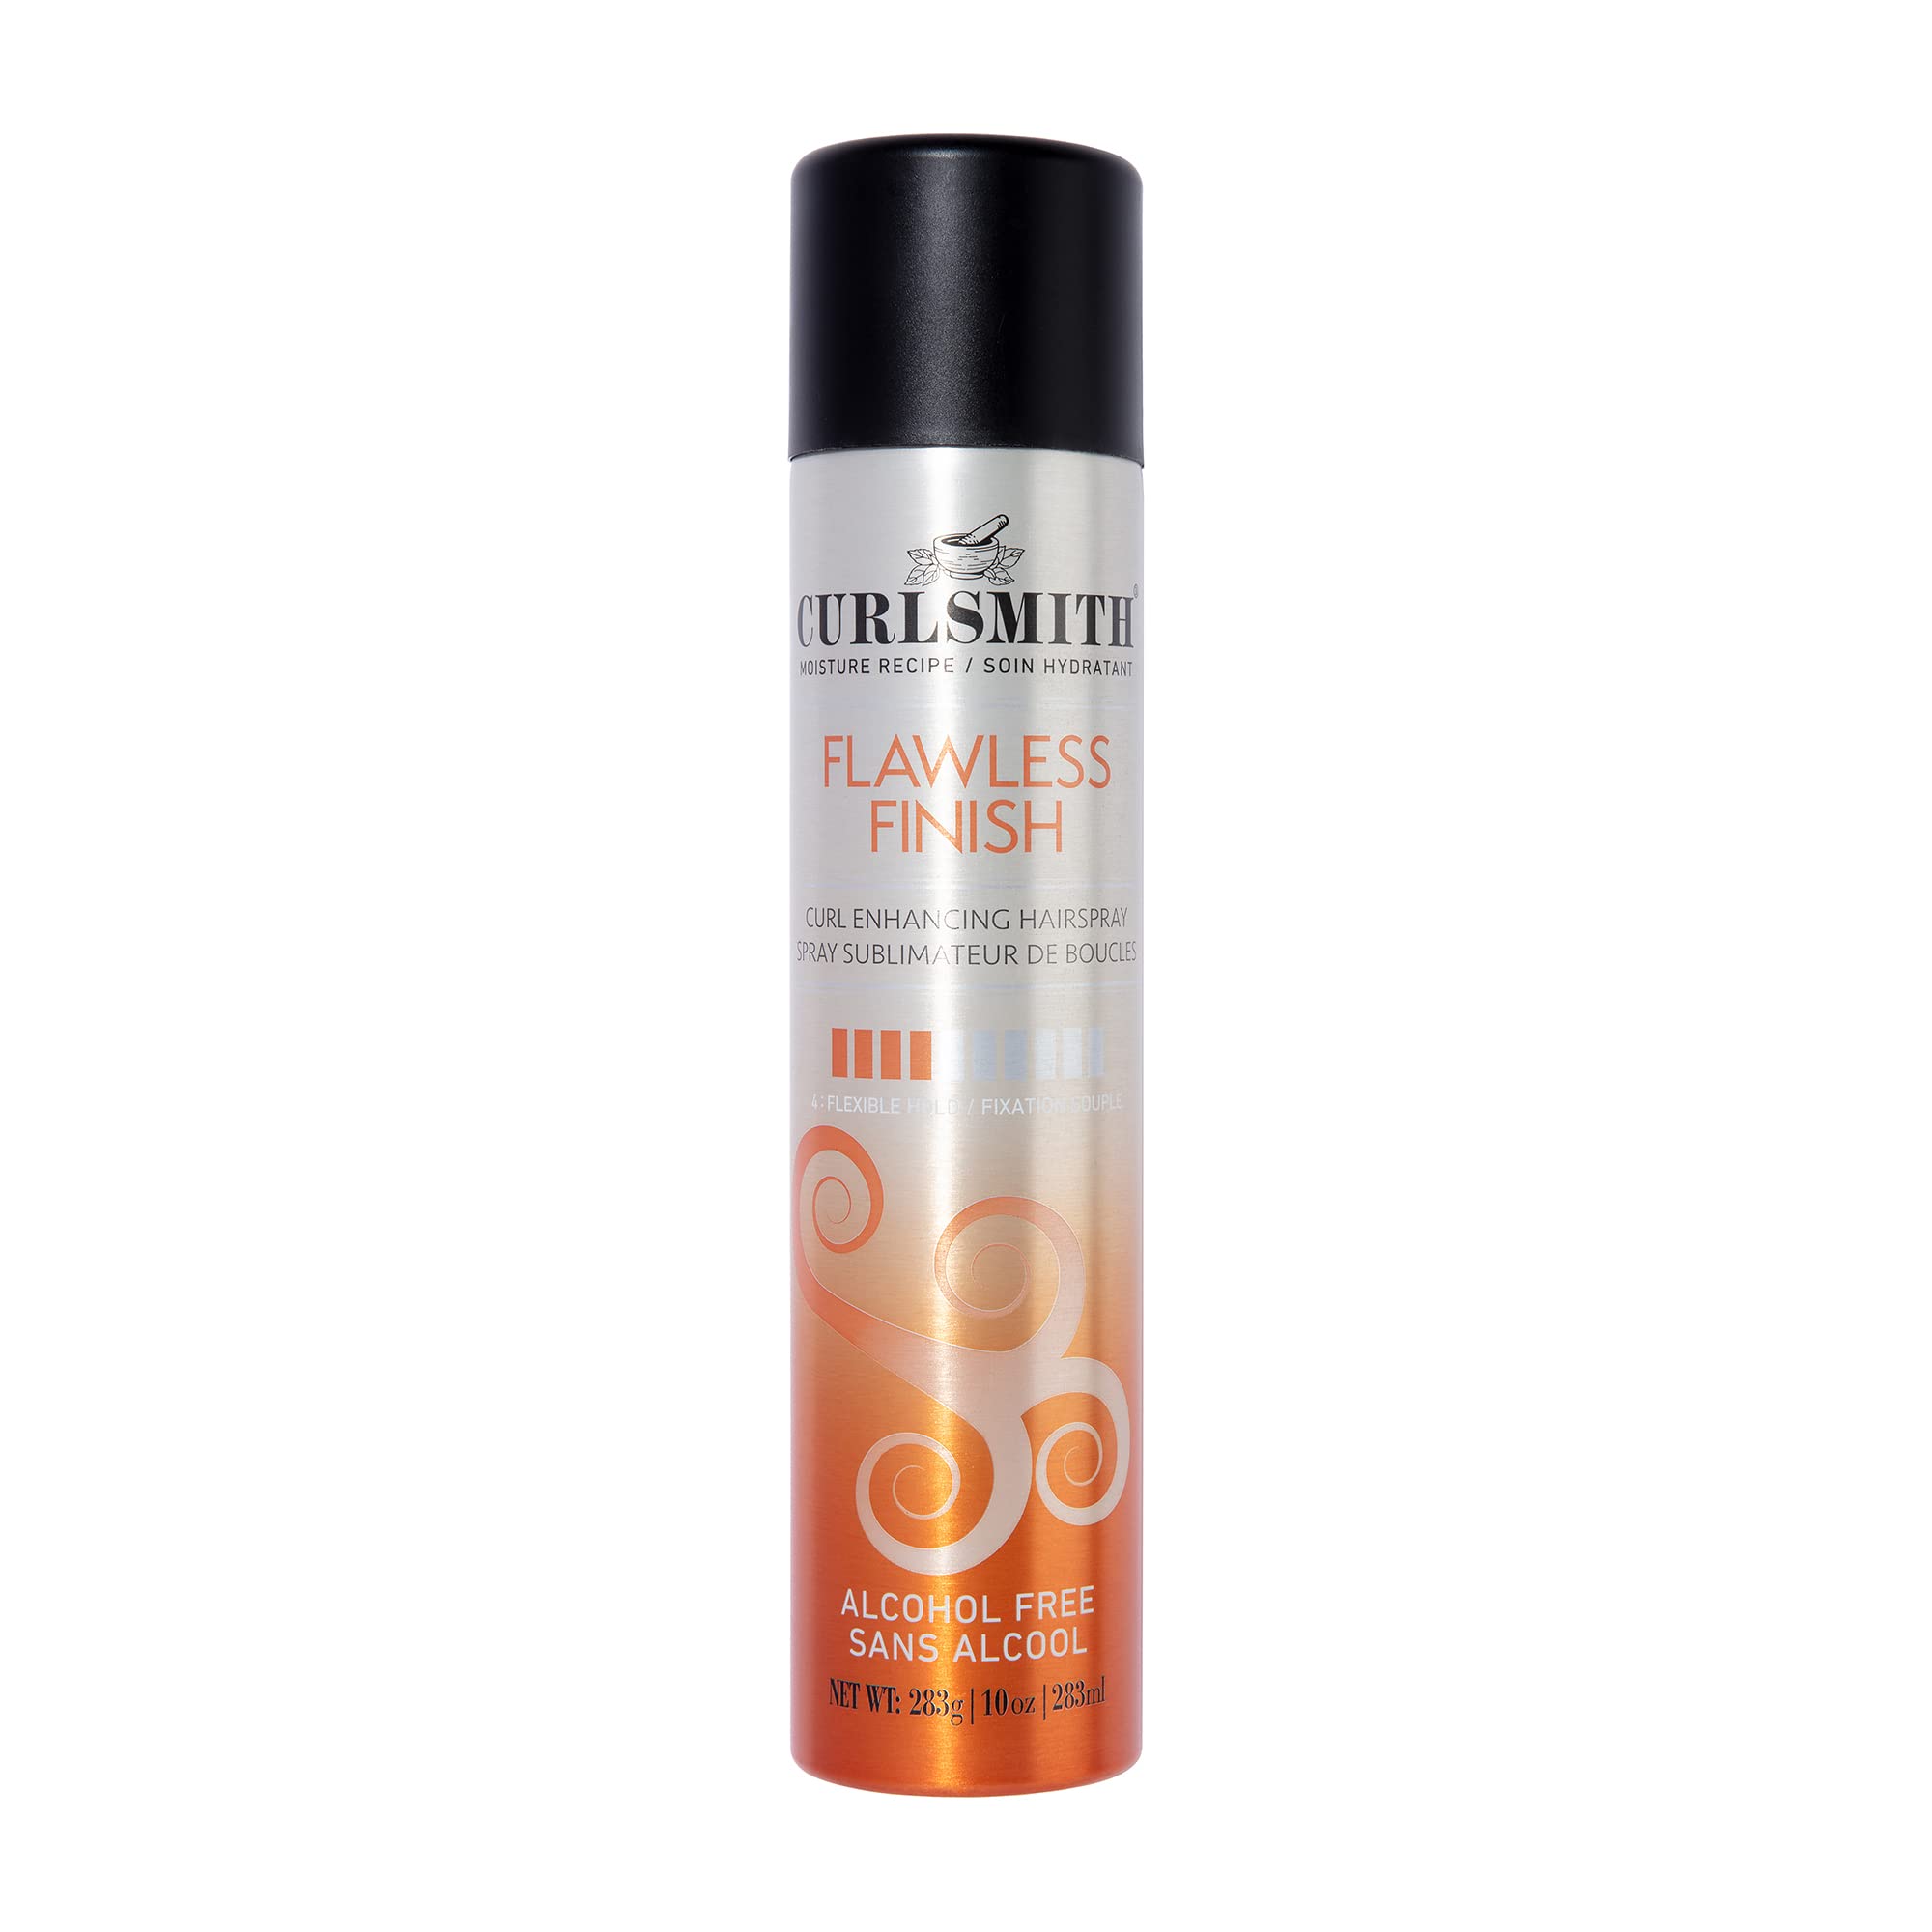 CURLSMITH - Flawless Finish Hairspray, Flexible Hold without Dryness, Alcohol Free, For Curly, Wavy and Coily Hair (10 oz)